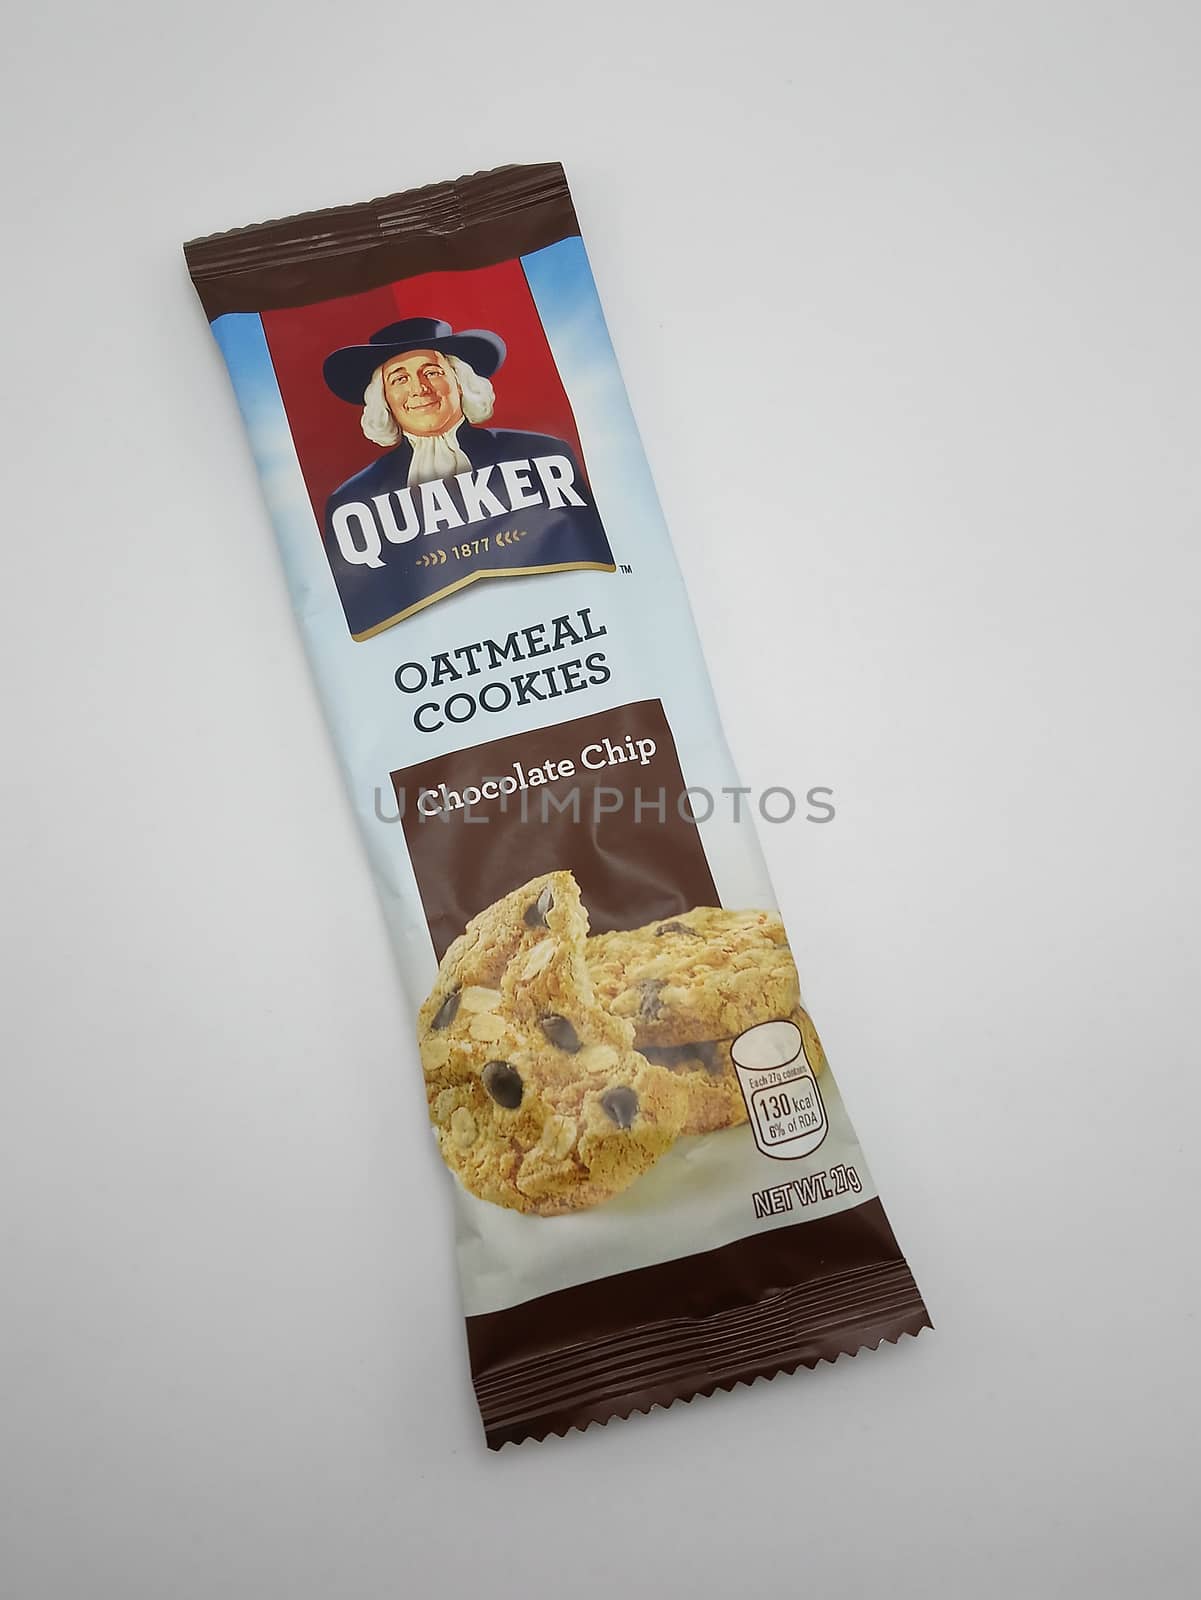 MANILA, PH - SEPT 25 - Quaker oatmeal cookies chocolate chip on September 25, 2020 in Manila, Philippines.